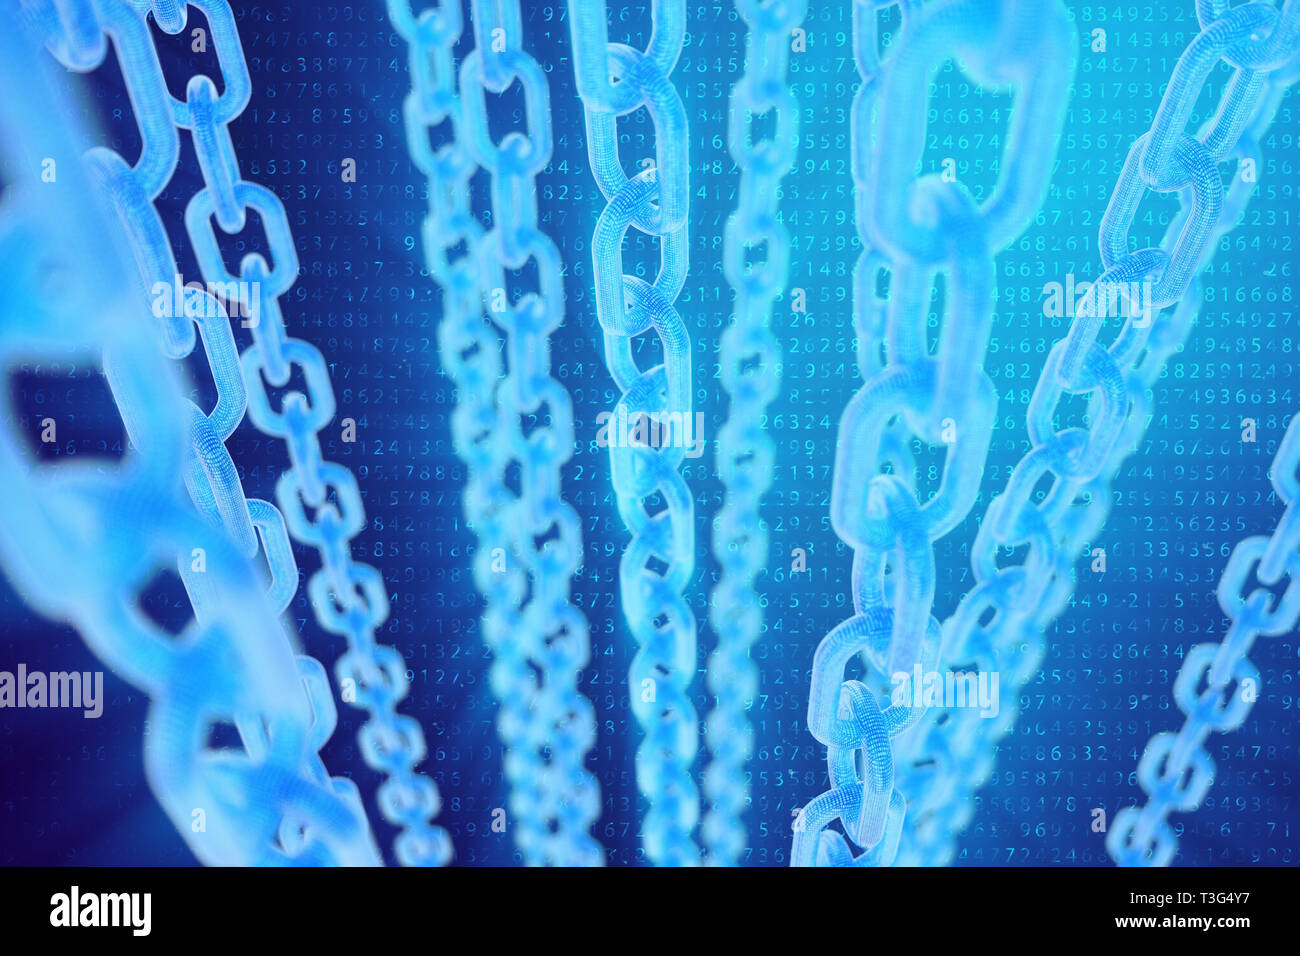 3D illustration digital blockchain code. Chain links network. Binary code on the background. Concept of Network, cryptocurrencies internet communicati Stock Photo